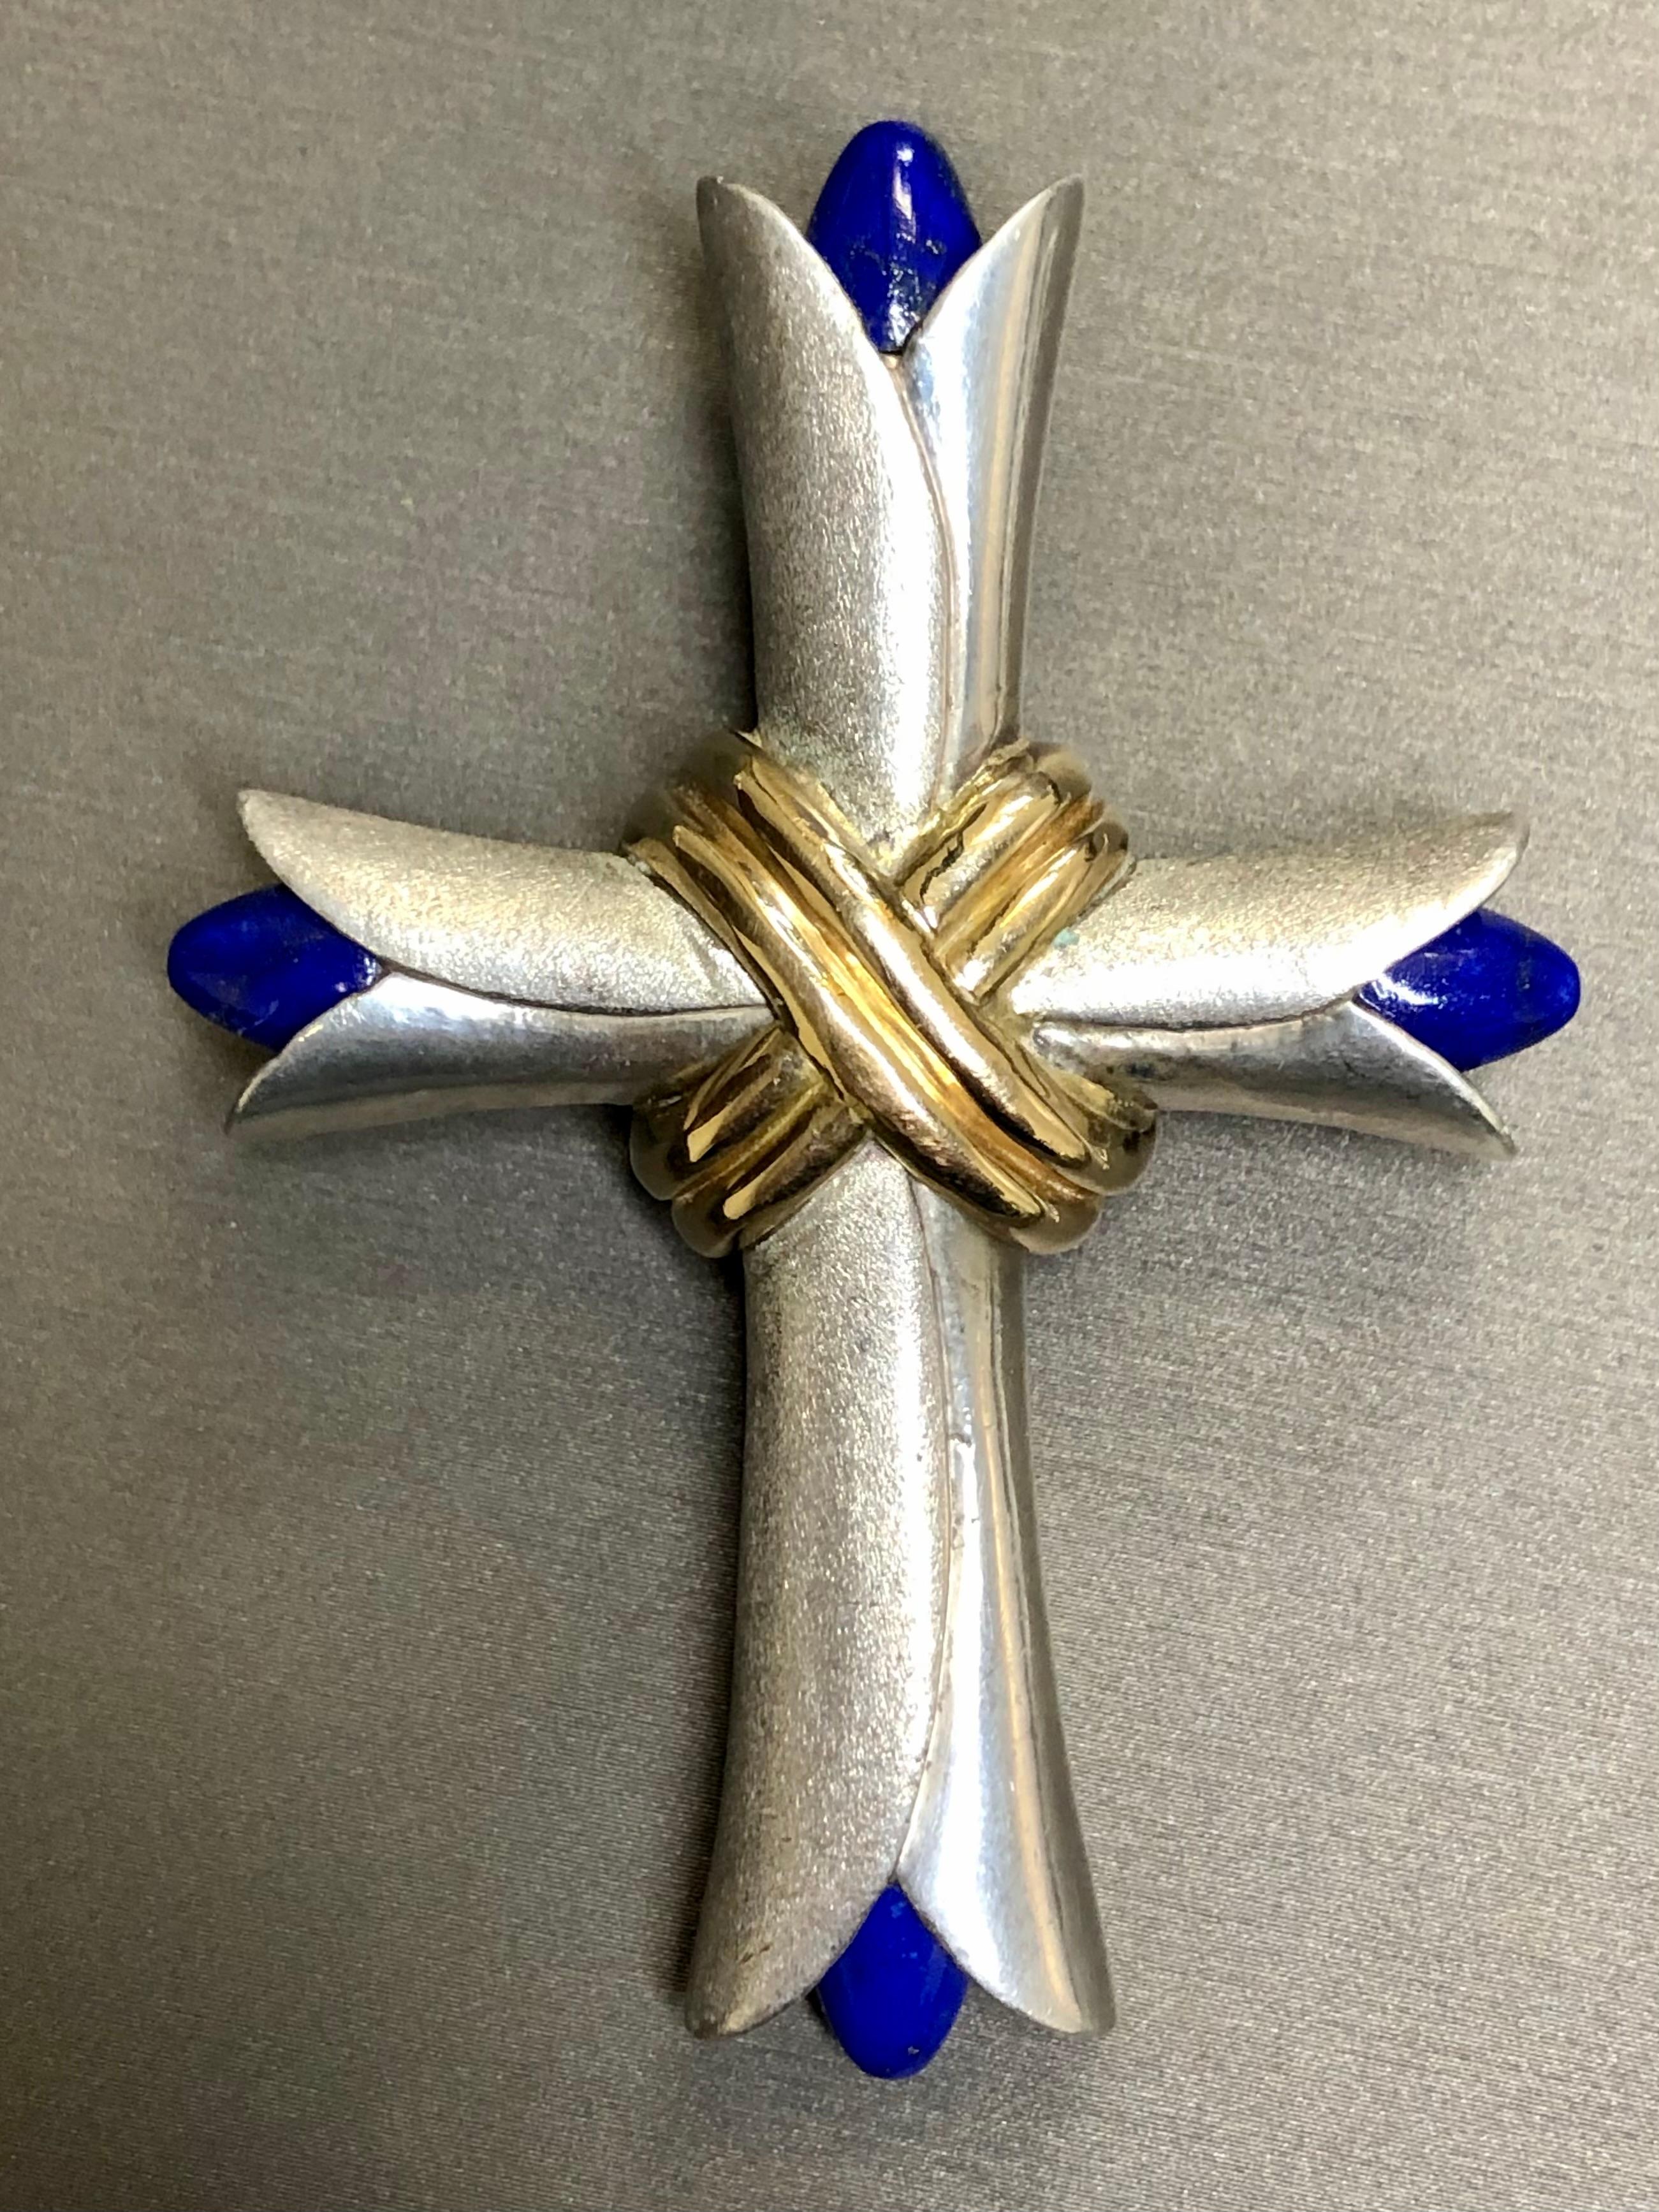 A wonderfully made cross circa the 1960’s done in in 14K yellow gold and heavy sterling silver and finished off in natural long lapis Cabochons. Makers mark is visible on the back.


Dimensions/Weight:

Cross measures 2.5” by 1.9” and weighs